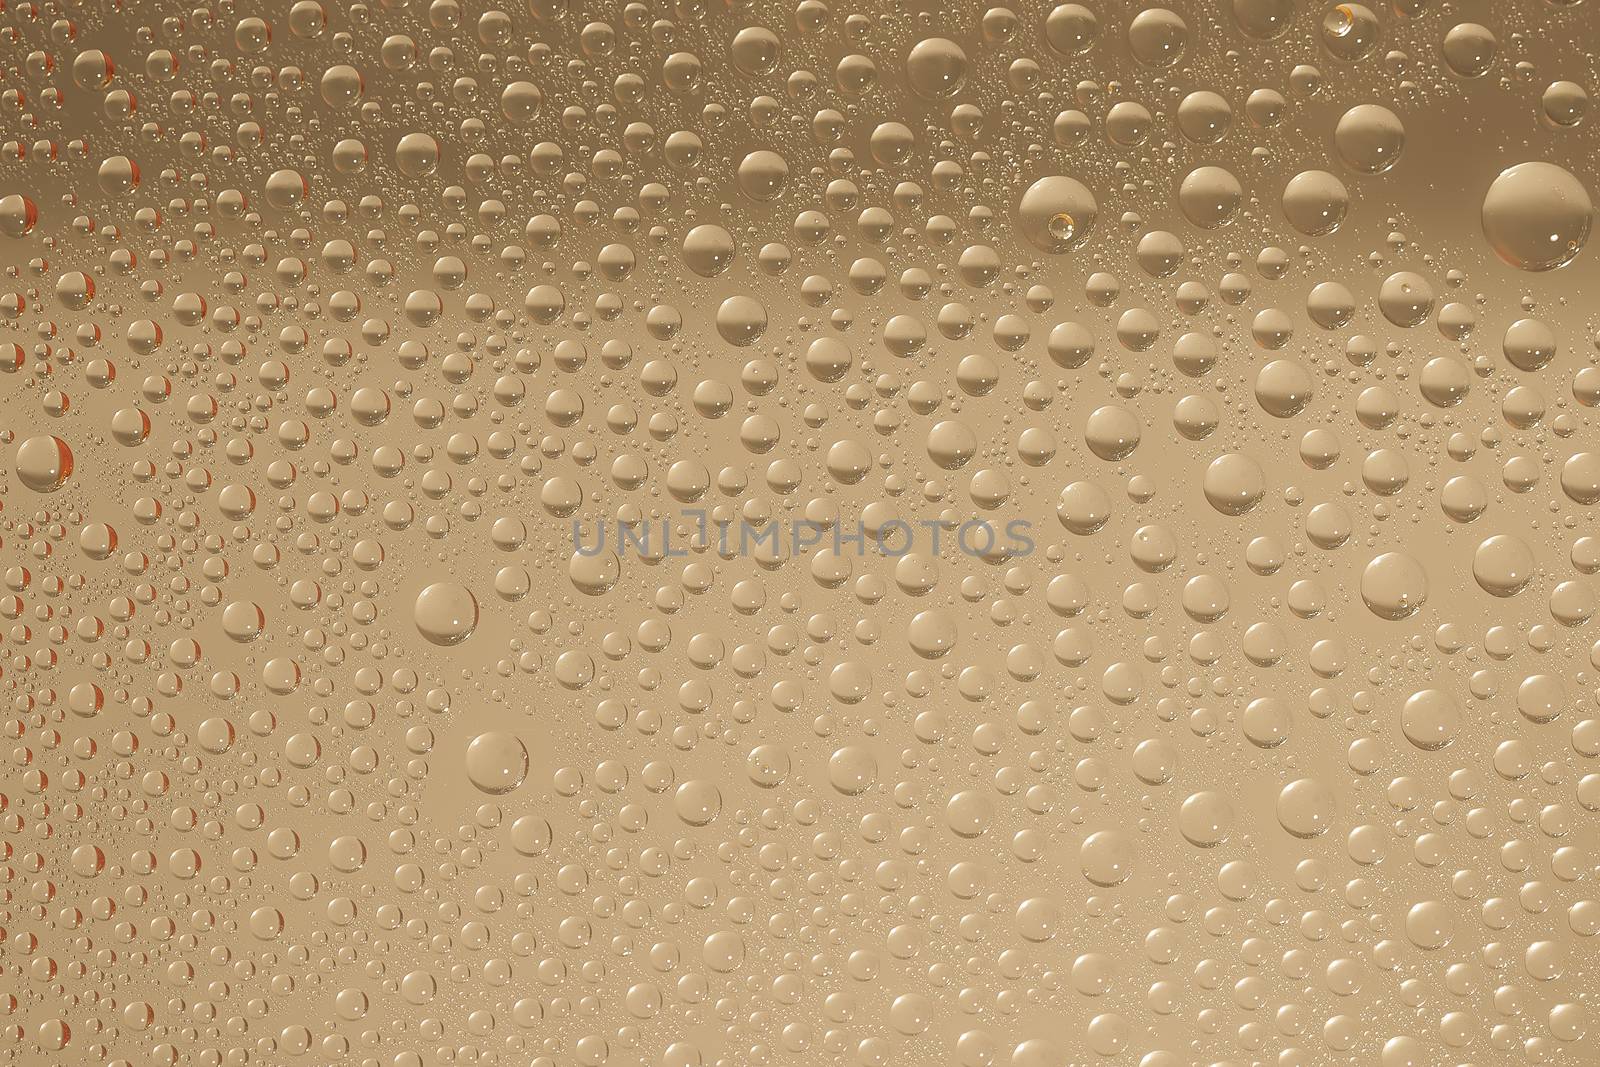 Abstract background with water drops on glass